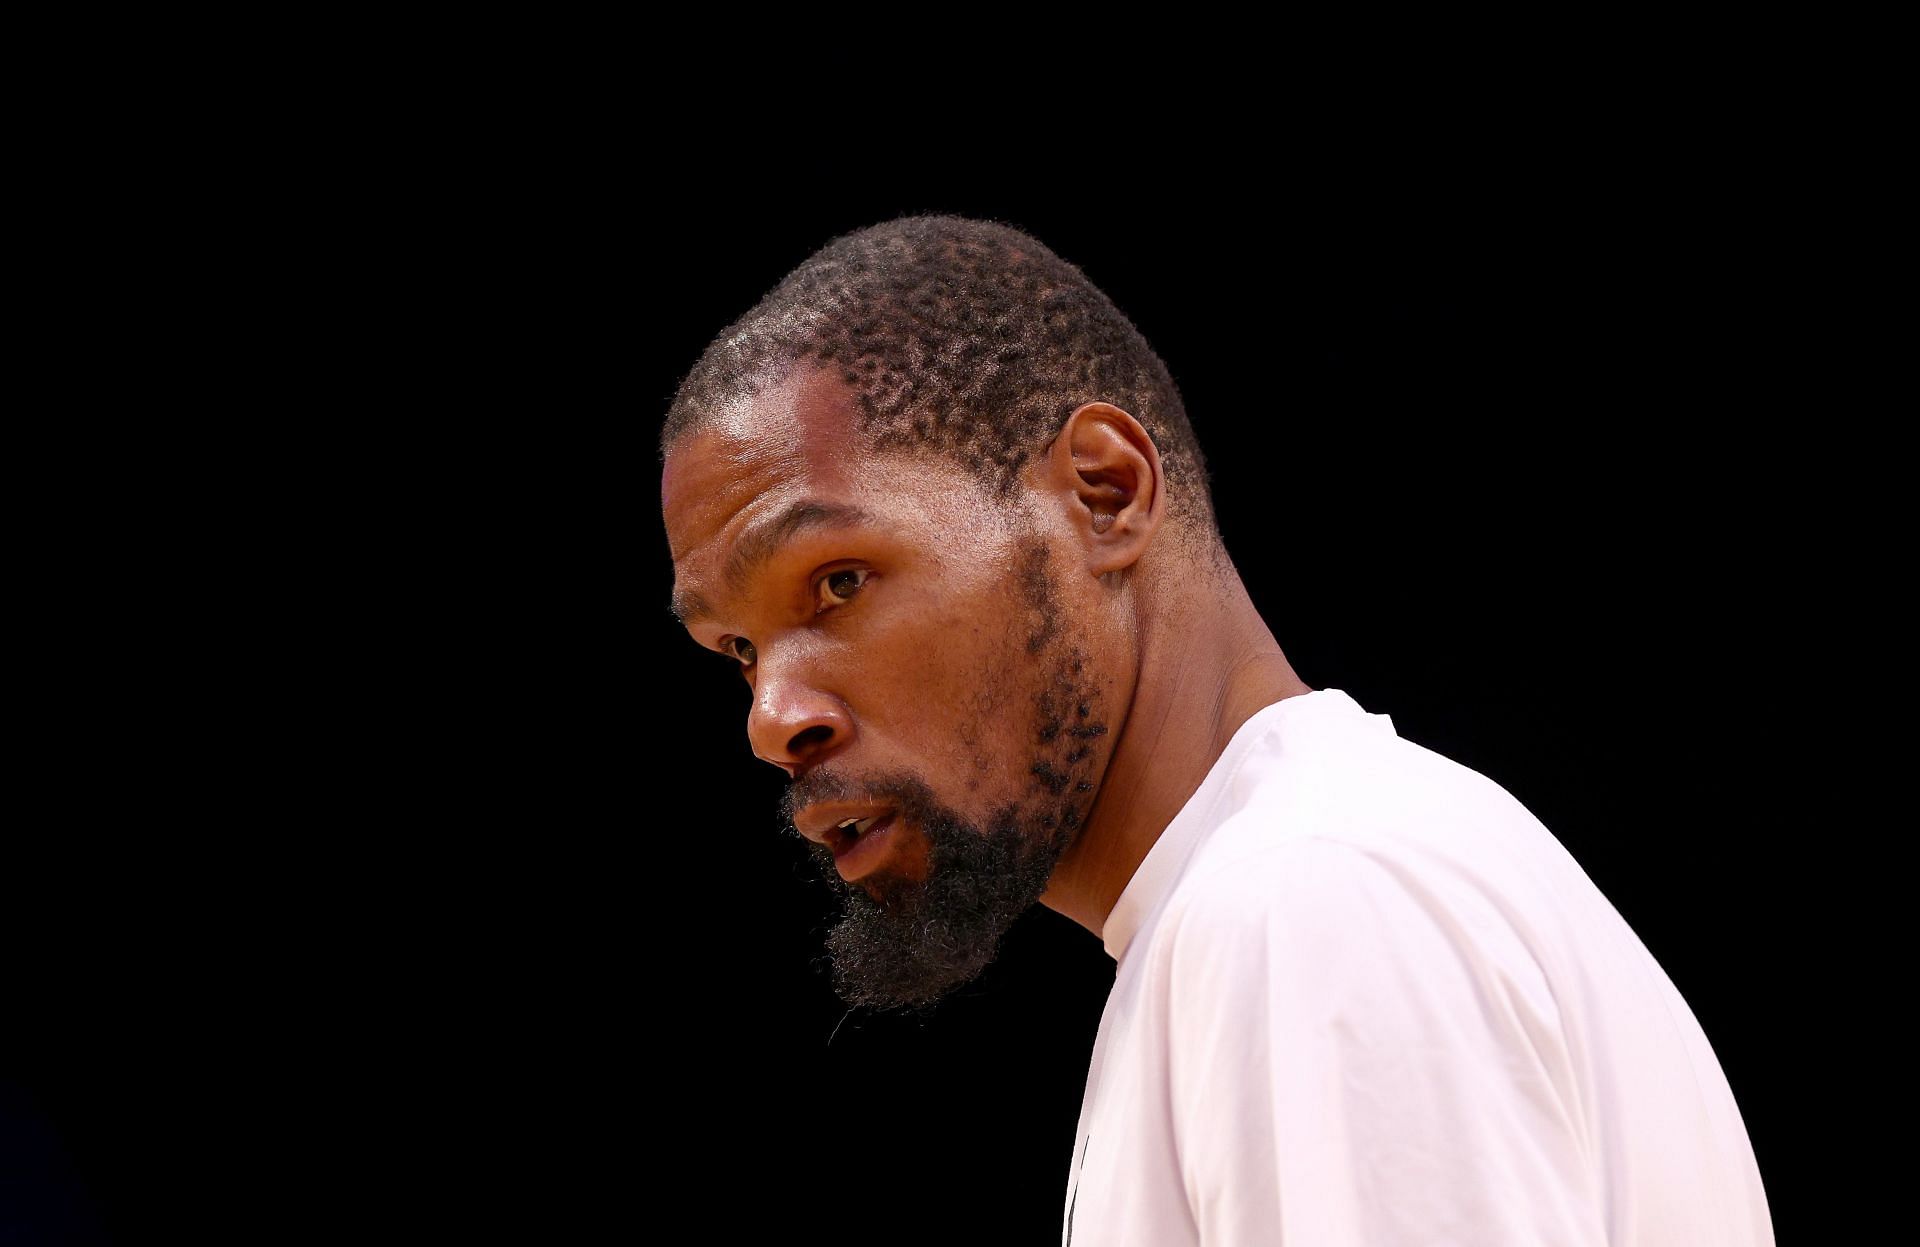 NBA analyst says KD&rsquo;s size puts him in &lsquo;rarefied air&rsquo;, calls him a unicorn